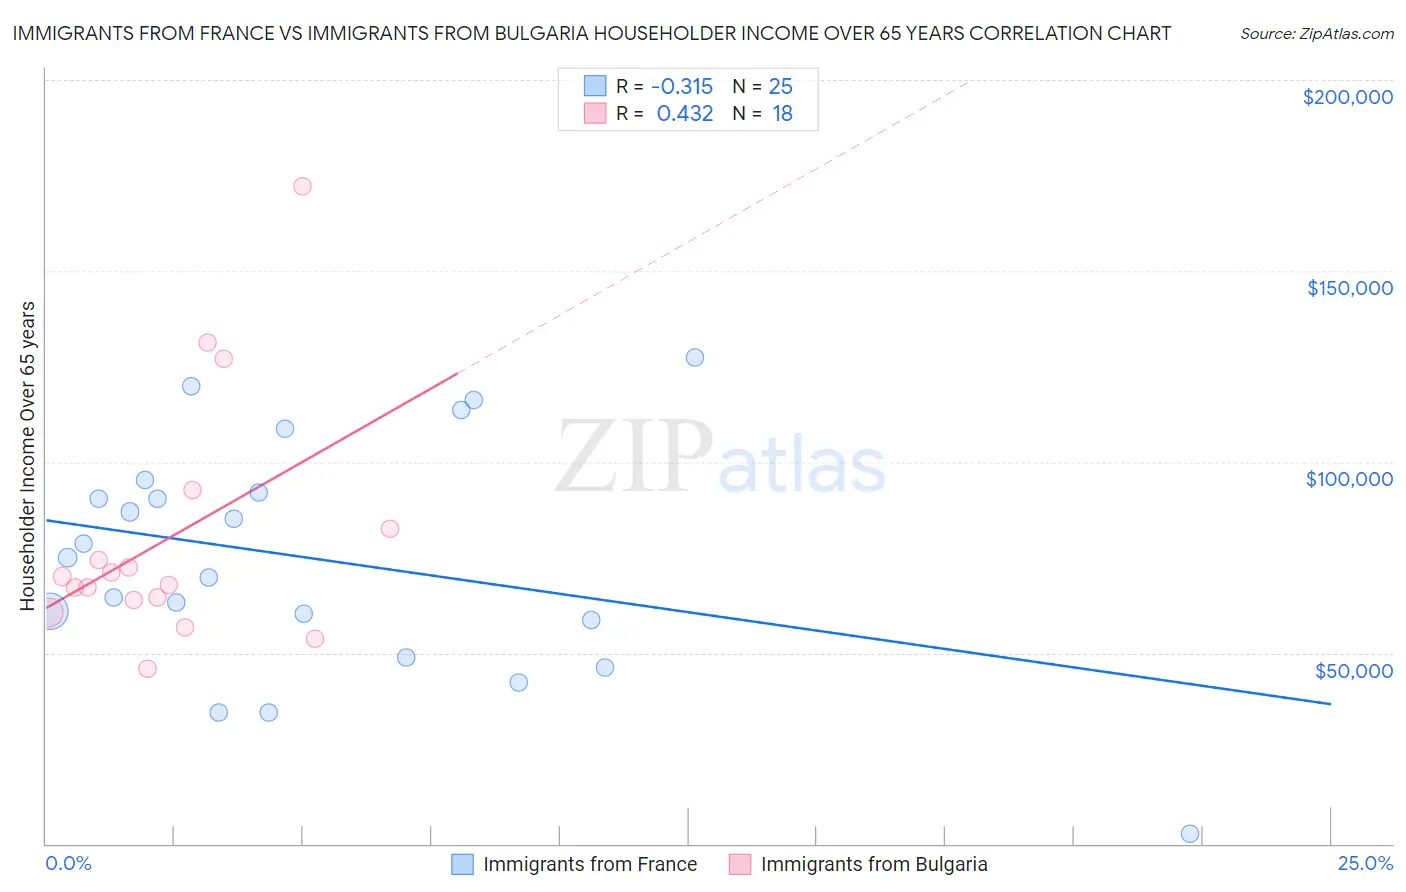 Immigrants from France vs Immigrants from Bulgaria Householder Income Over 65 years